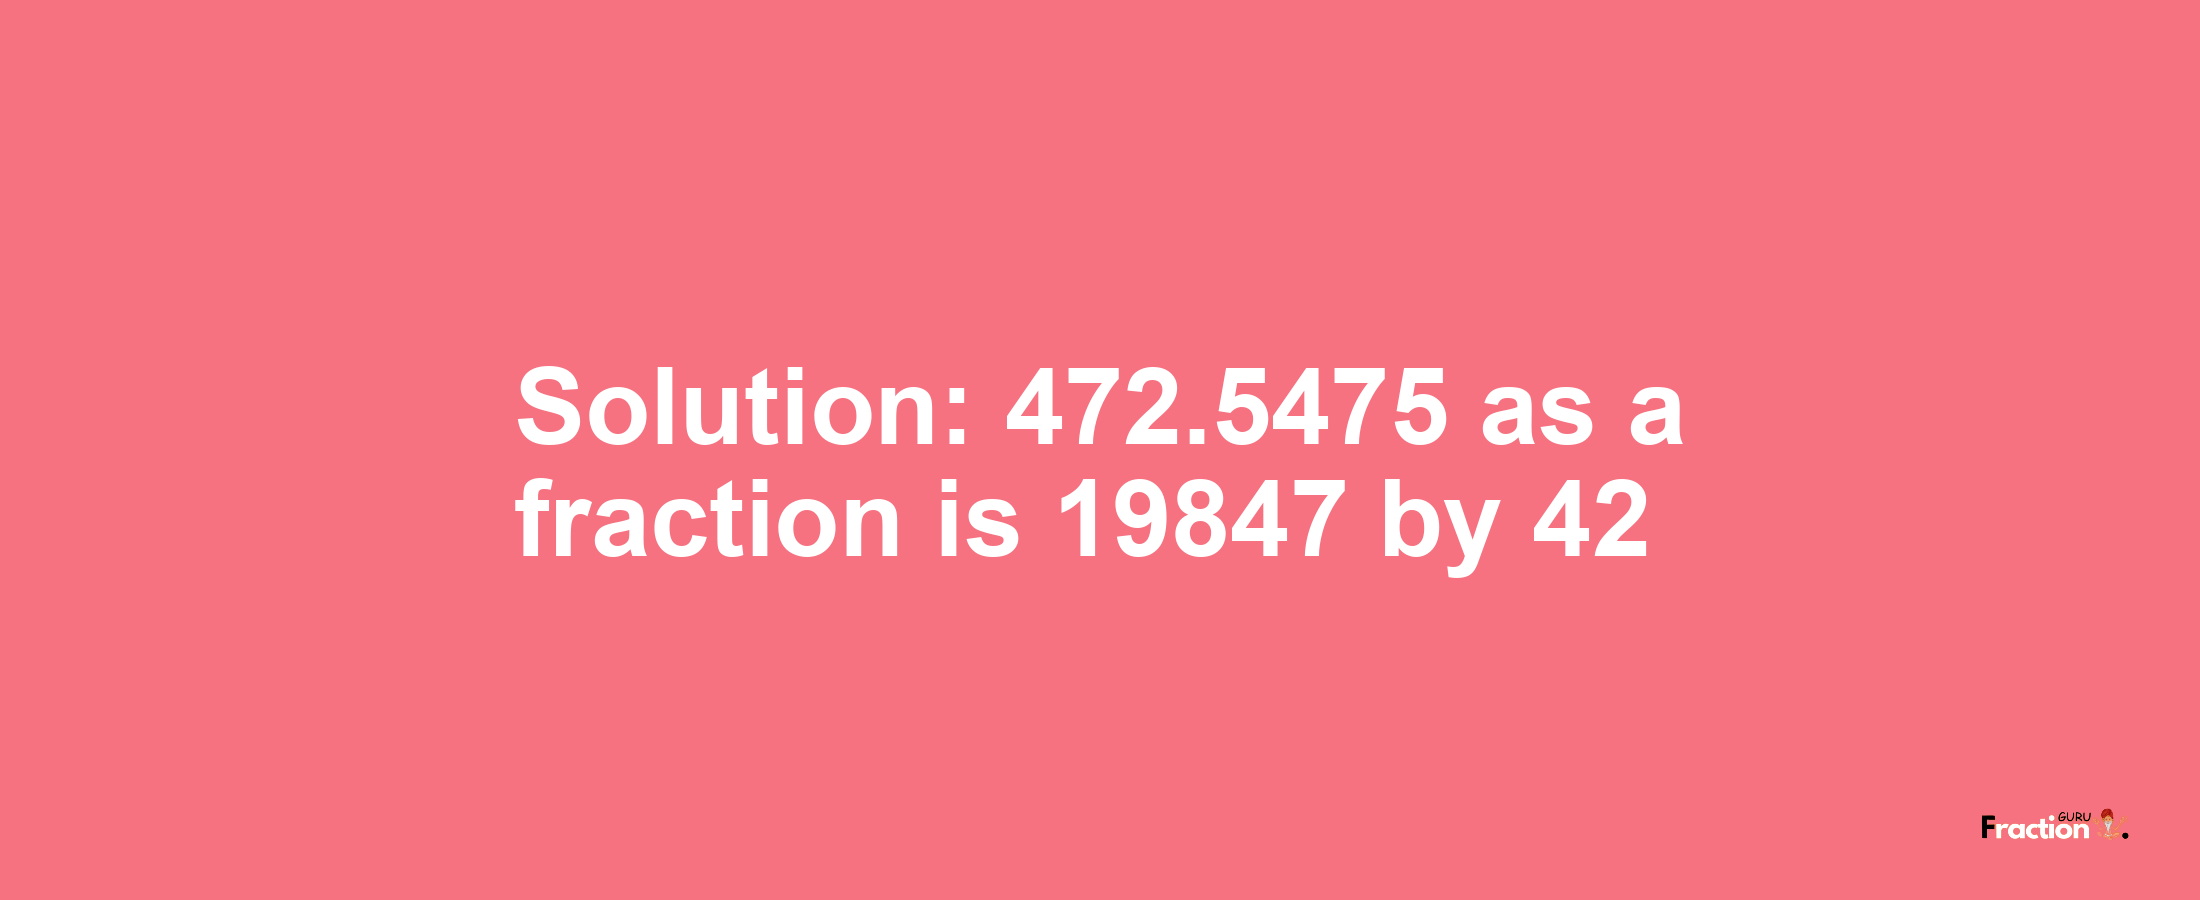 Solution:472.5475 as a fraction is 19847/42